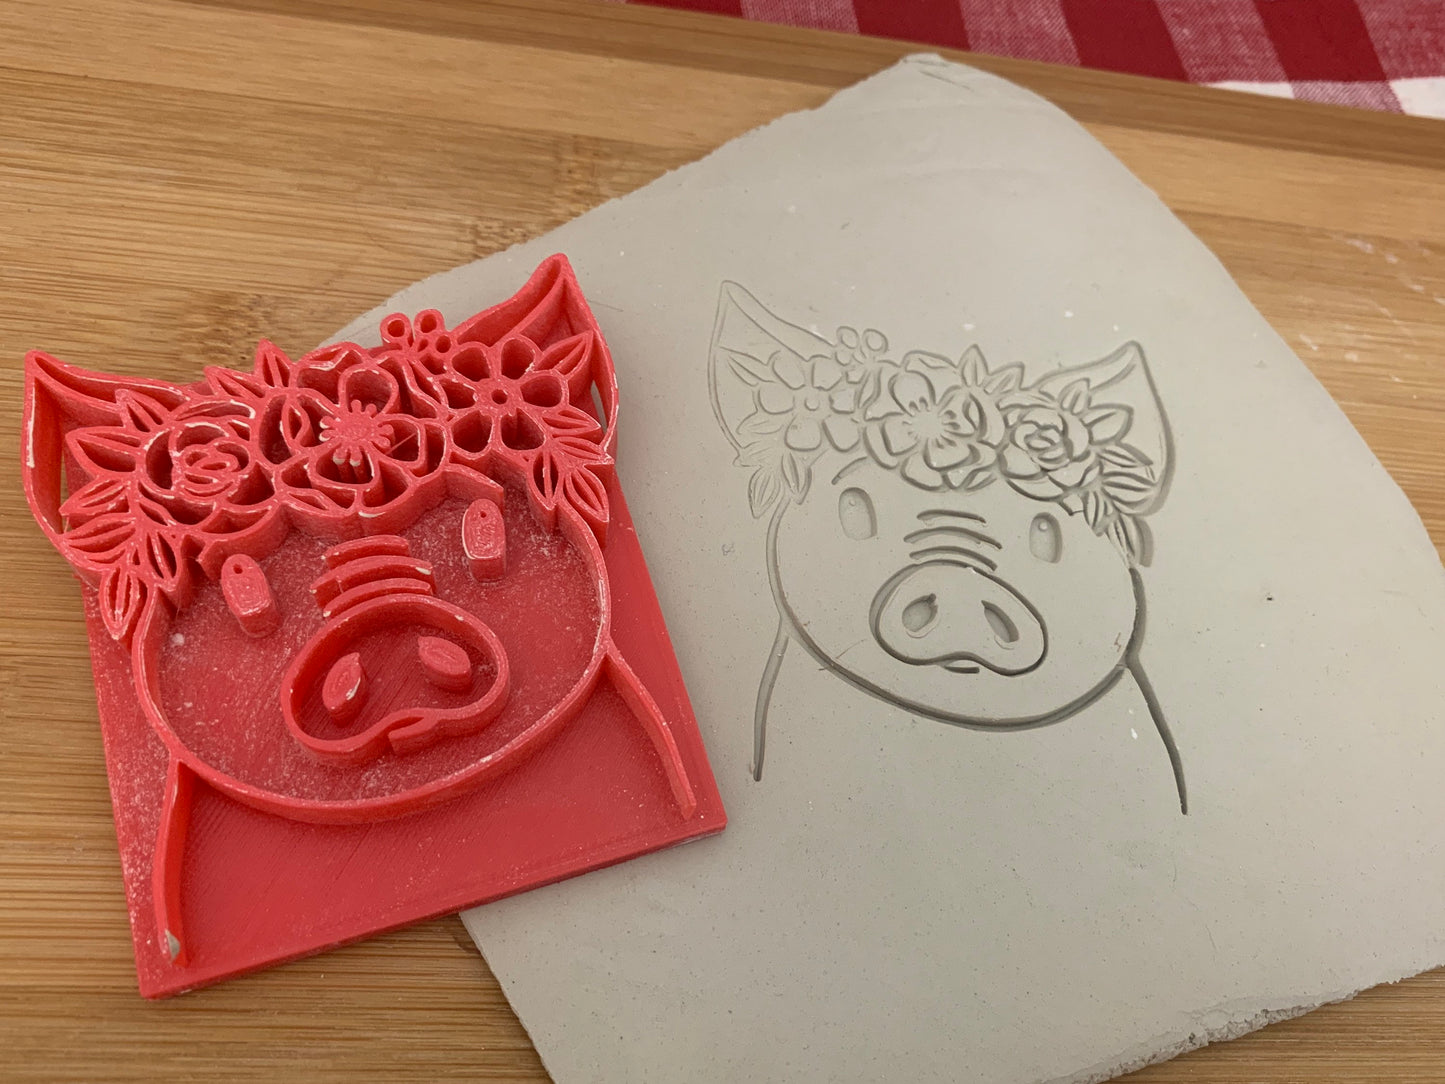 Pottery Stamp, pig face with floral wreath design, Fondant, Clay, Leather, Pottery Tool, plastic 3d printed, multiple sizes available